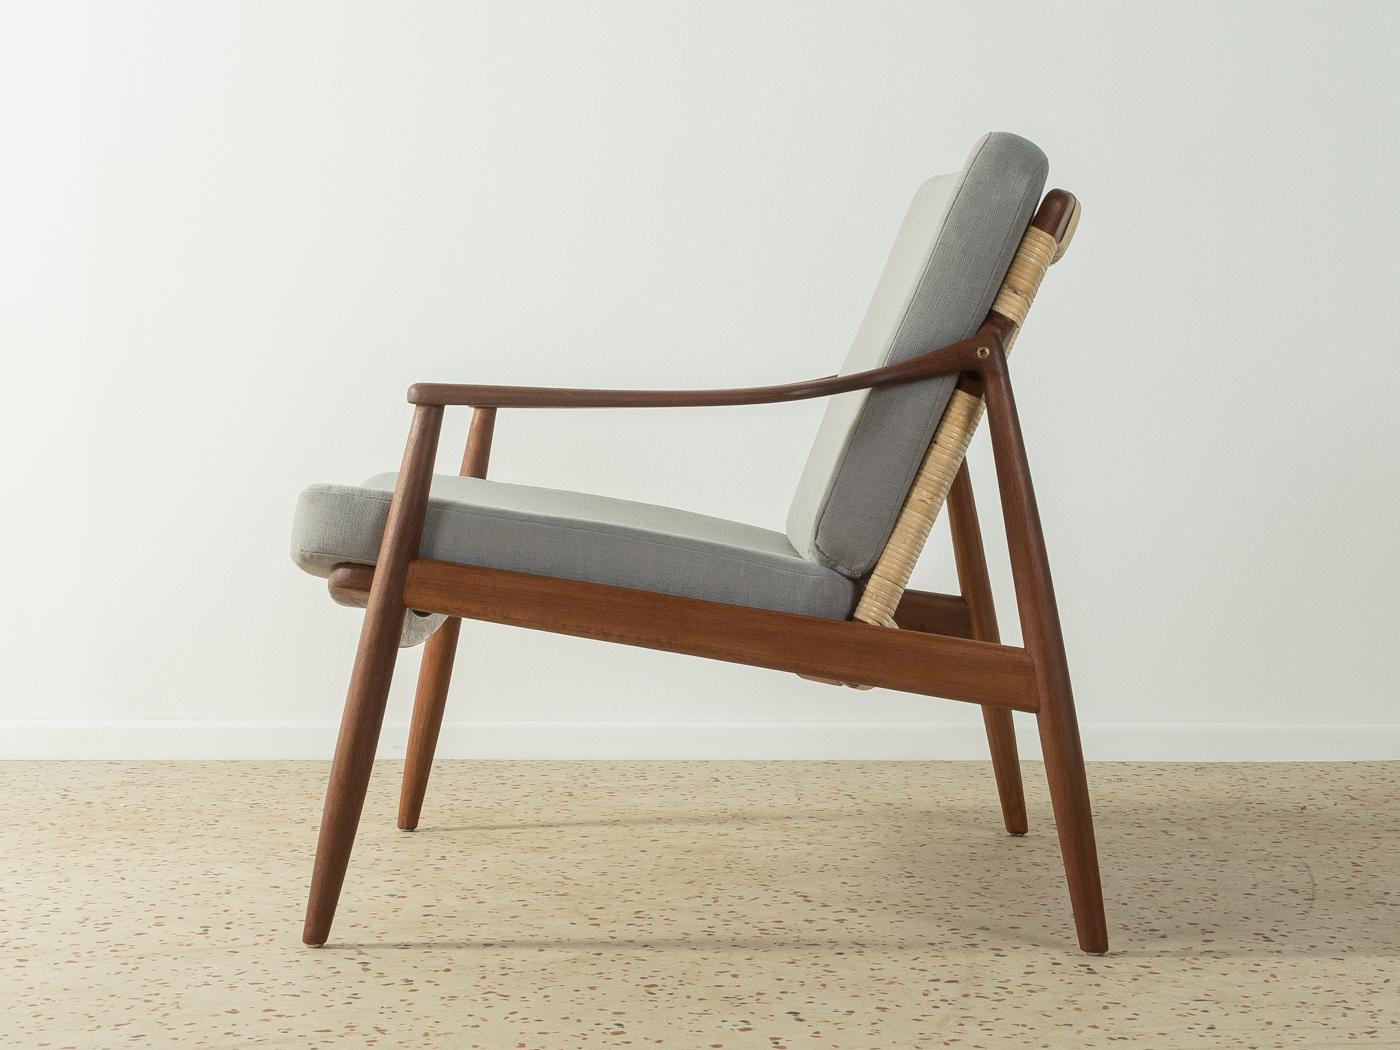 xclusive armchair, Type 400, from the 1950s by Hartmut Lohmeyer for Wilkhahn. High-quality teak frame with new, contemporary wicker work. The armchair has been reupholstered and covered with a high-quality grey upholstery fabric.

Quality